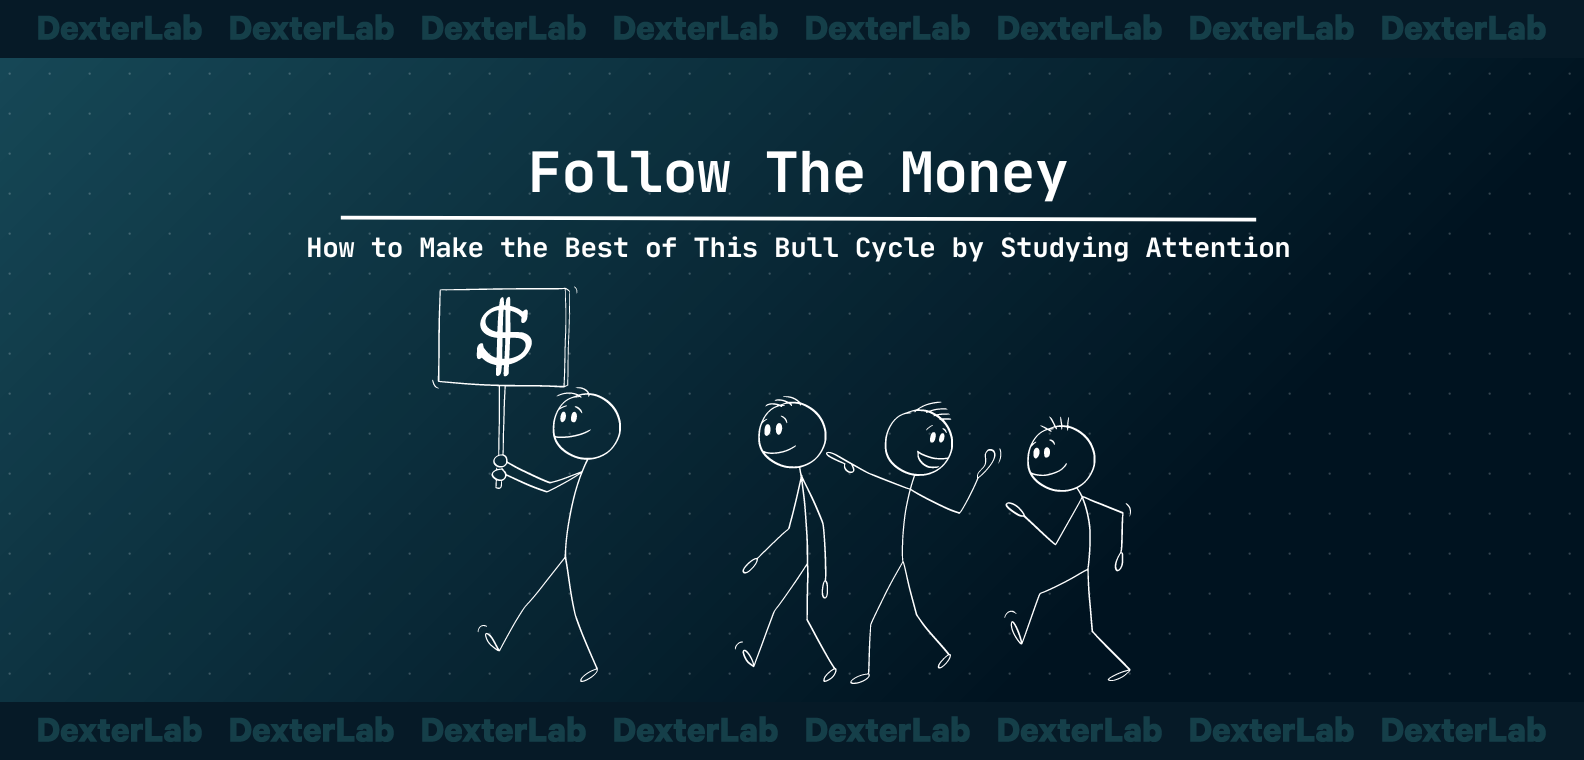 Follow the Money: How to Make the Best of This Bull Cycle by Studying Attention?